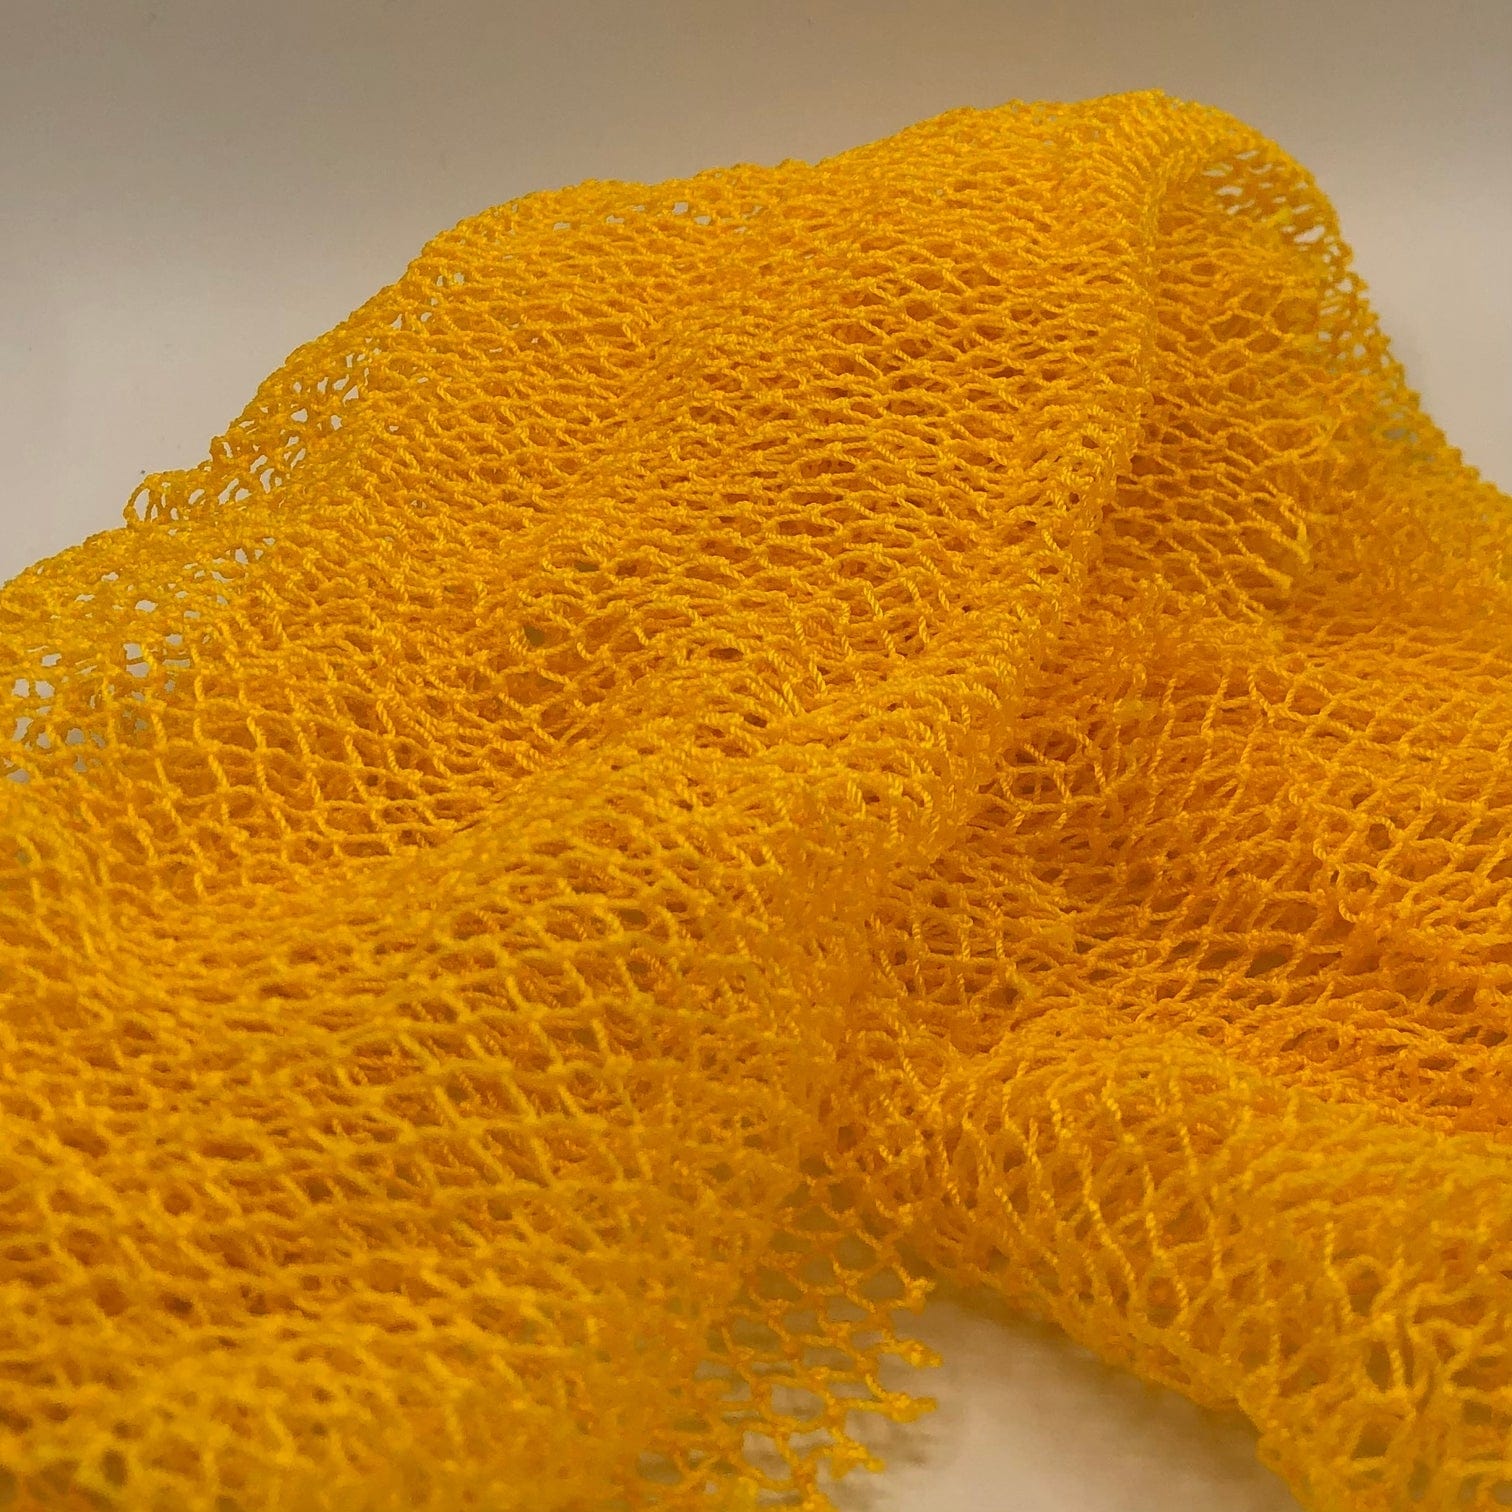 Body Buff African Bath Net. African bath sponge to exfoliate and soften skin. use nylon African bath net sponge to smooth skin. helps with keratosis pillars and strawberry legs.